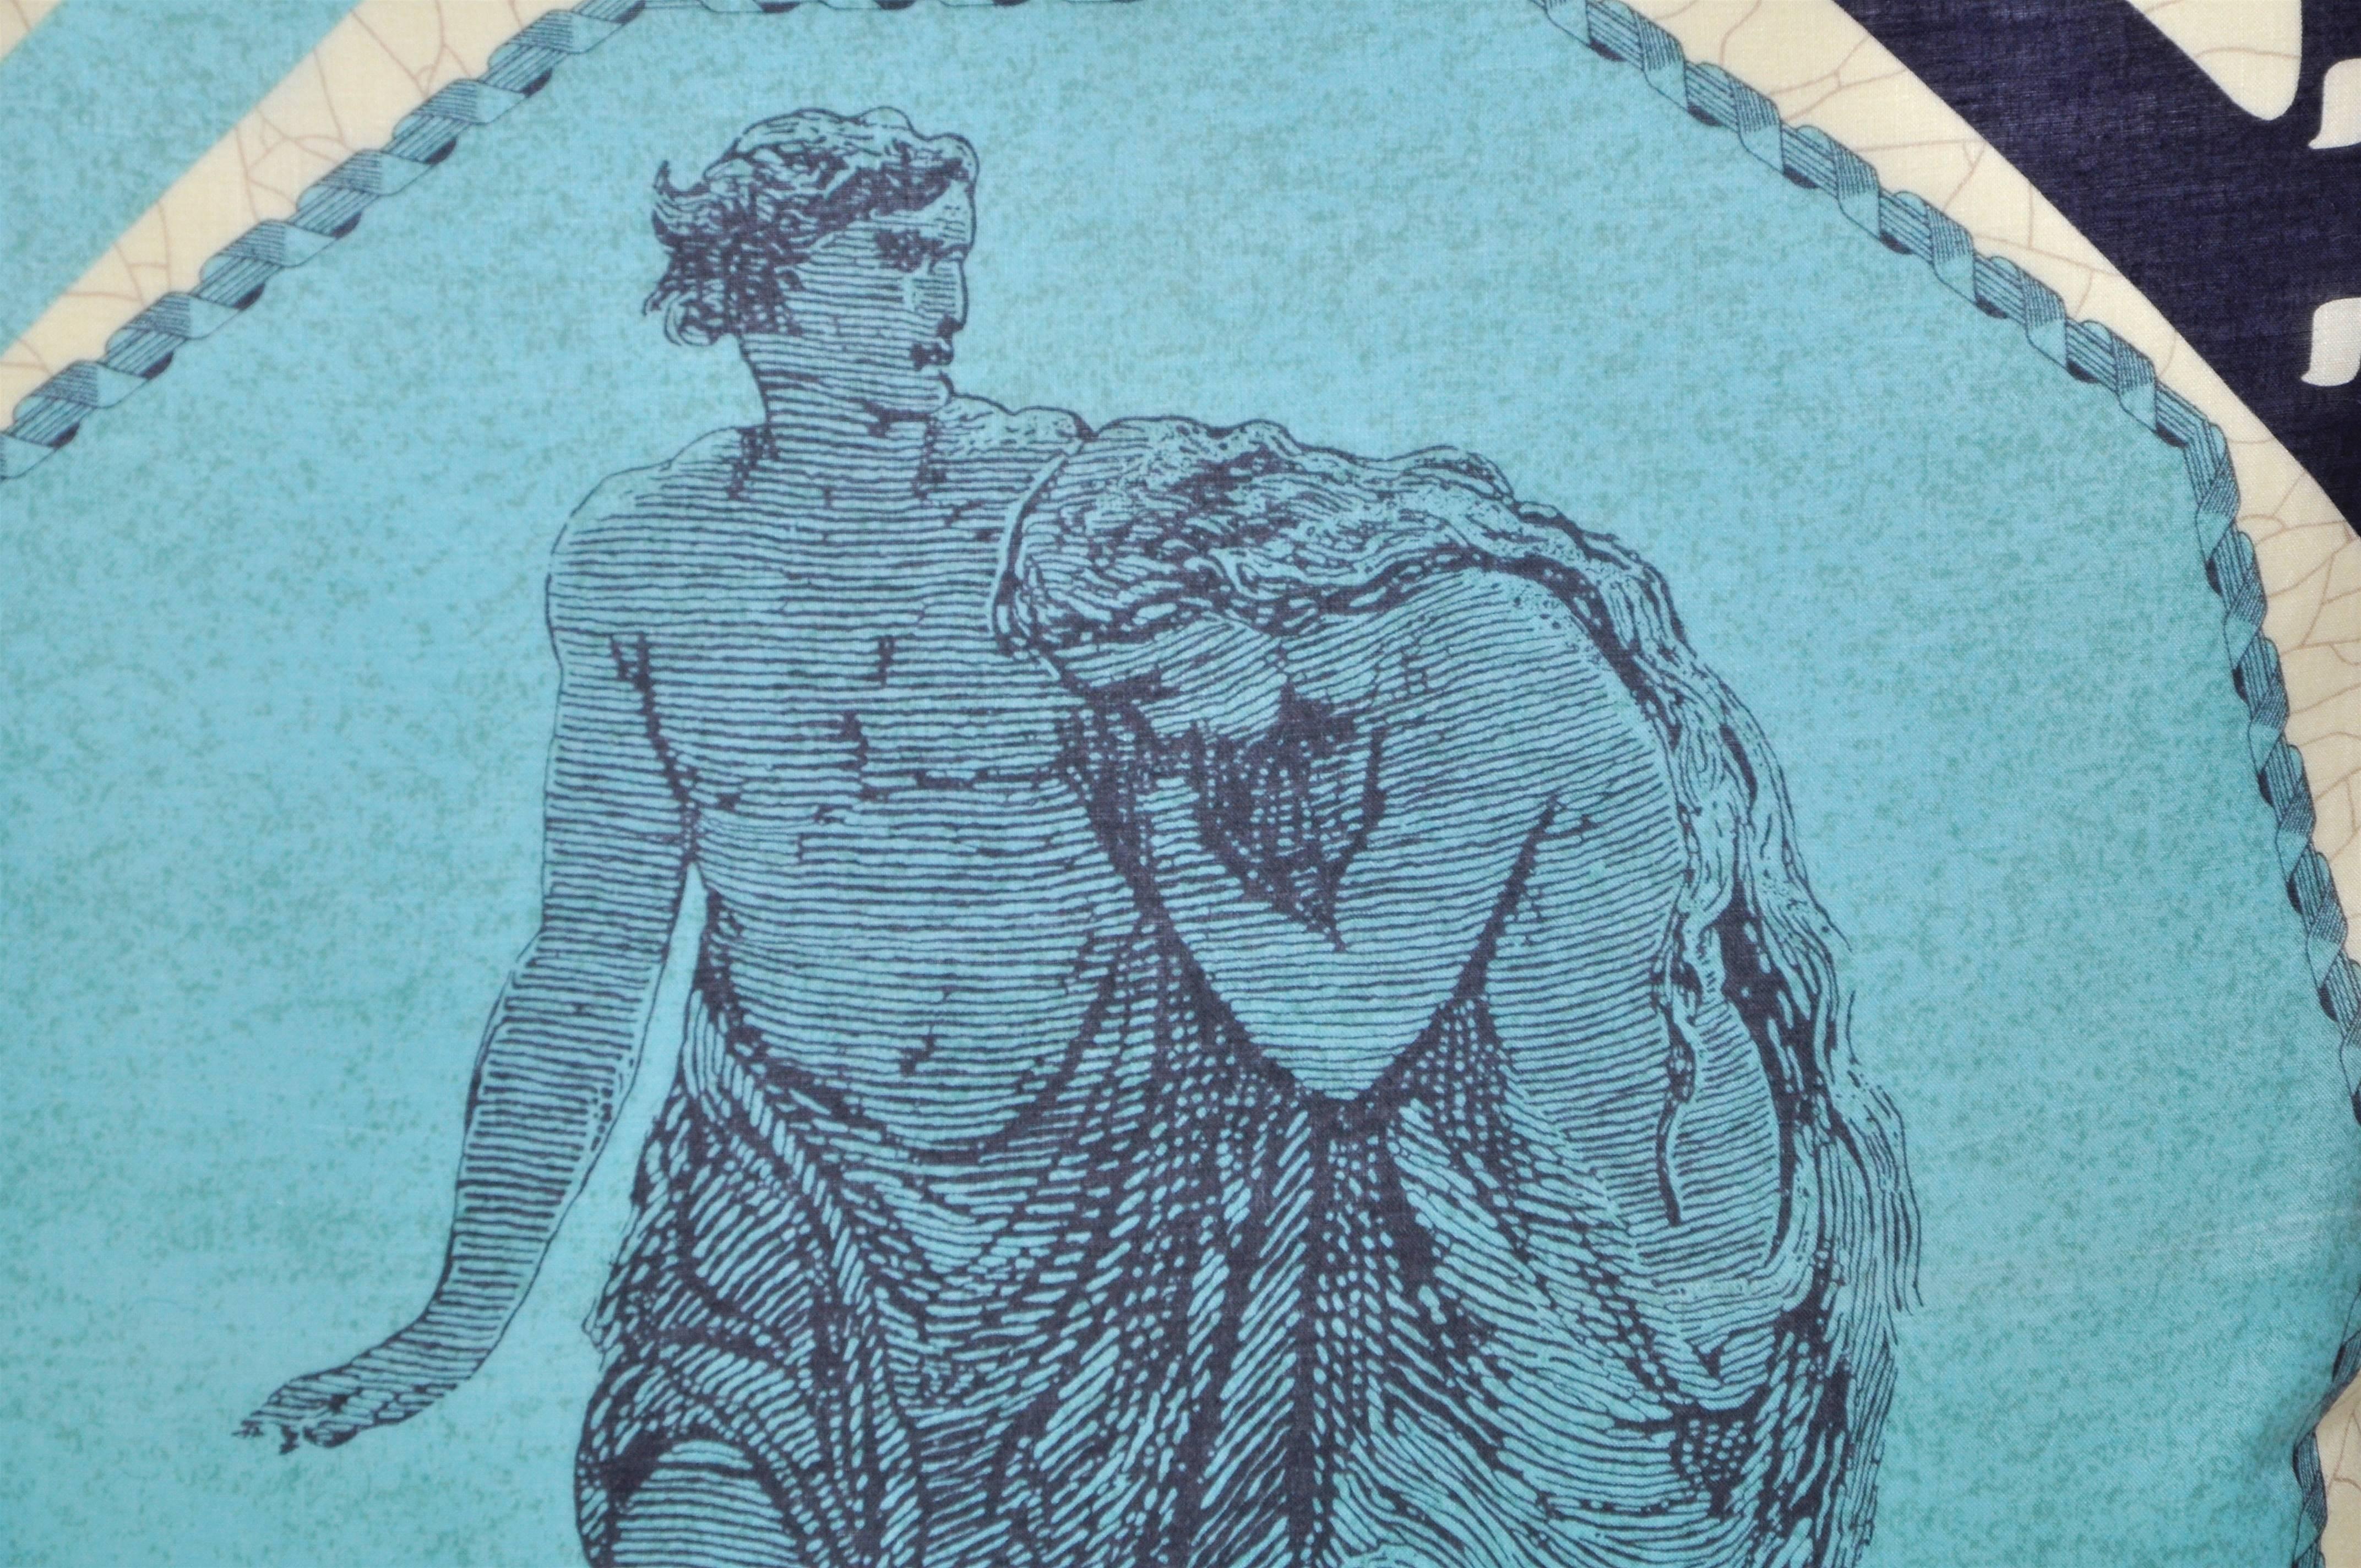 Custom-made one-of-a-kind luxury cushion (pillow) created from an extremely rare Jean-Paul Gaultier vintage garment in a striking palette. The unusual design illustrates a figurative scene in classical style in a vibrant blue and bold black, the